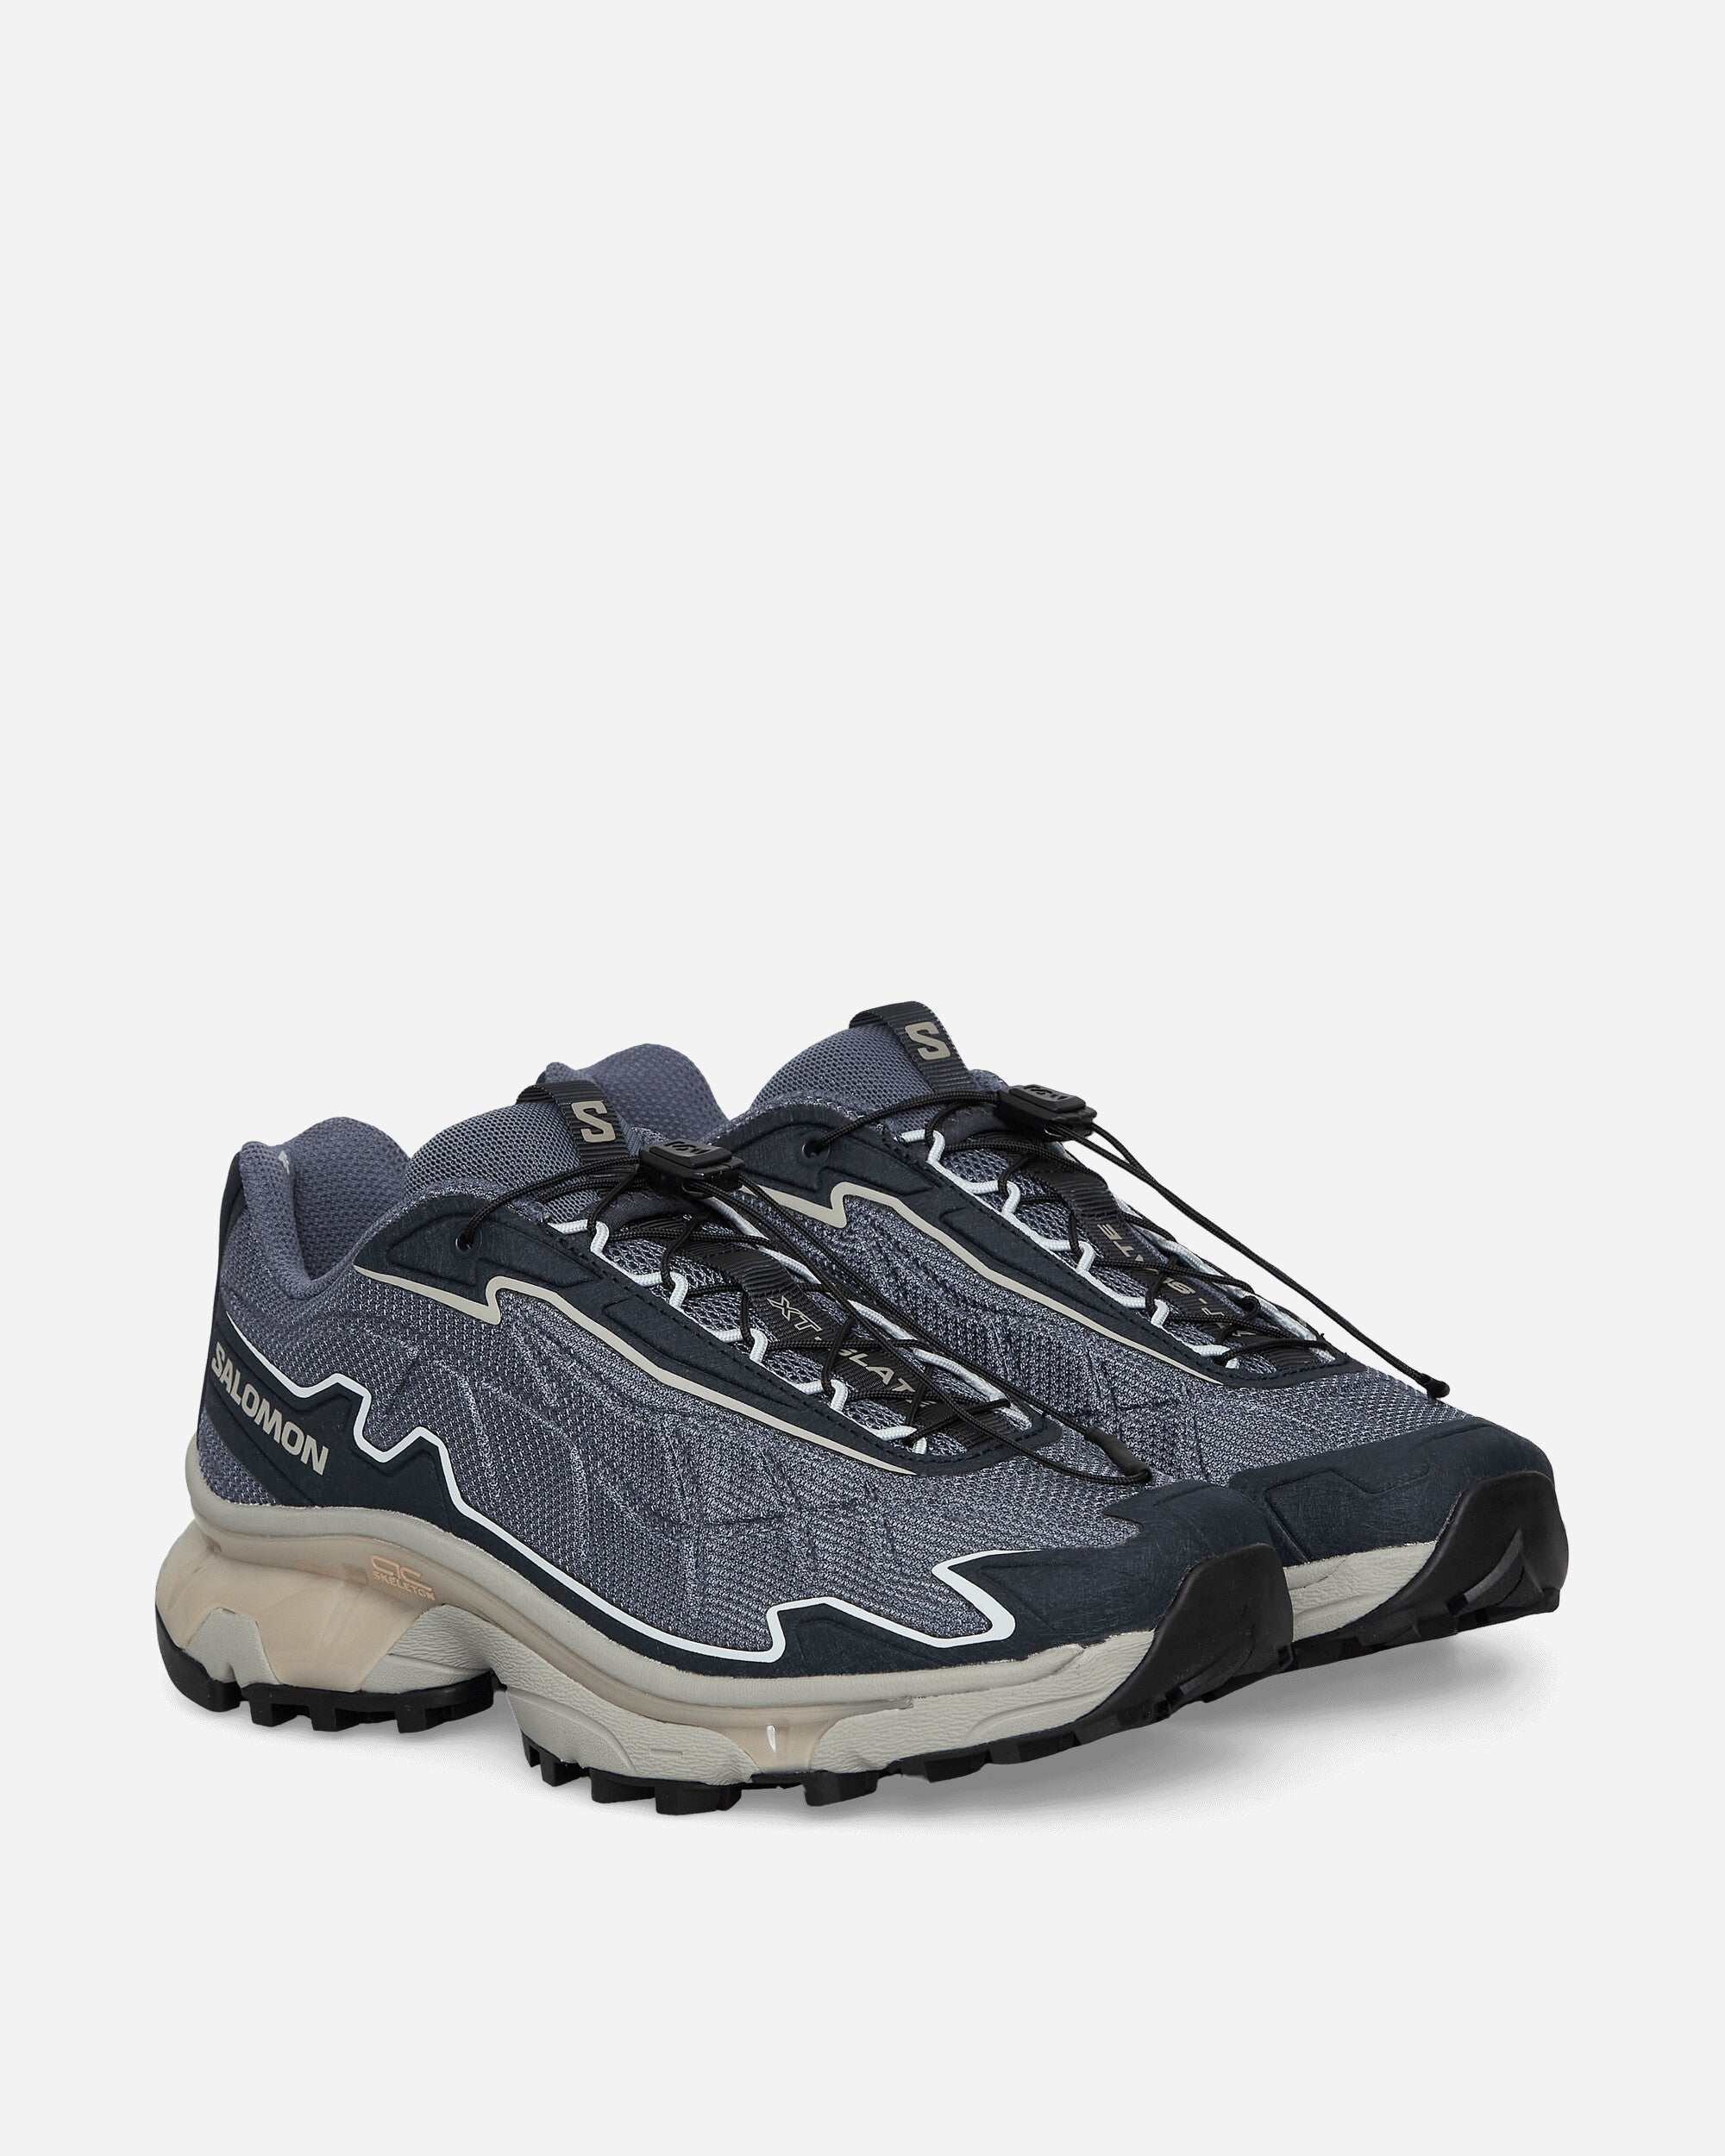 XT-Slate Sneakers Grisaille / Carbon